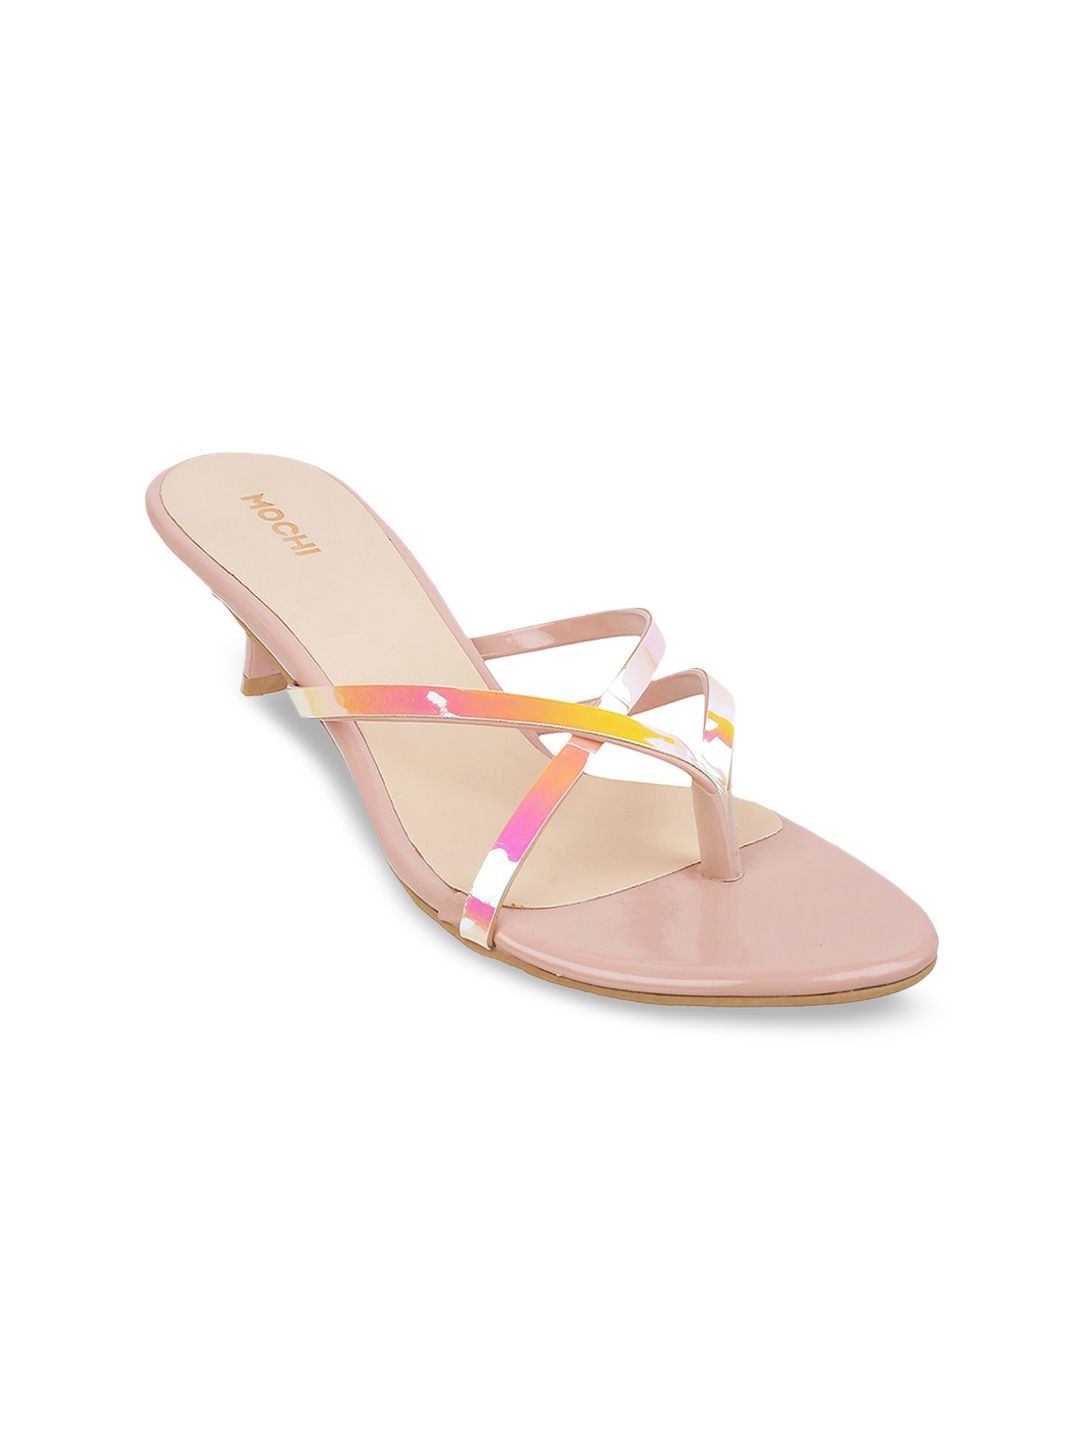 Mochi Pink Embellished Kitten Sandals Price in India